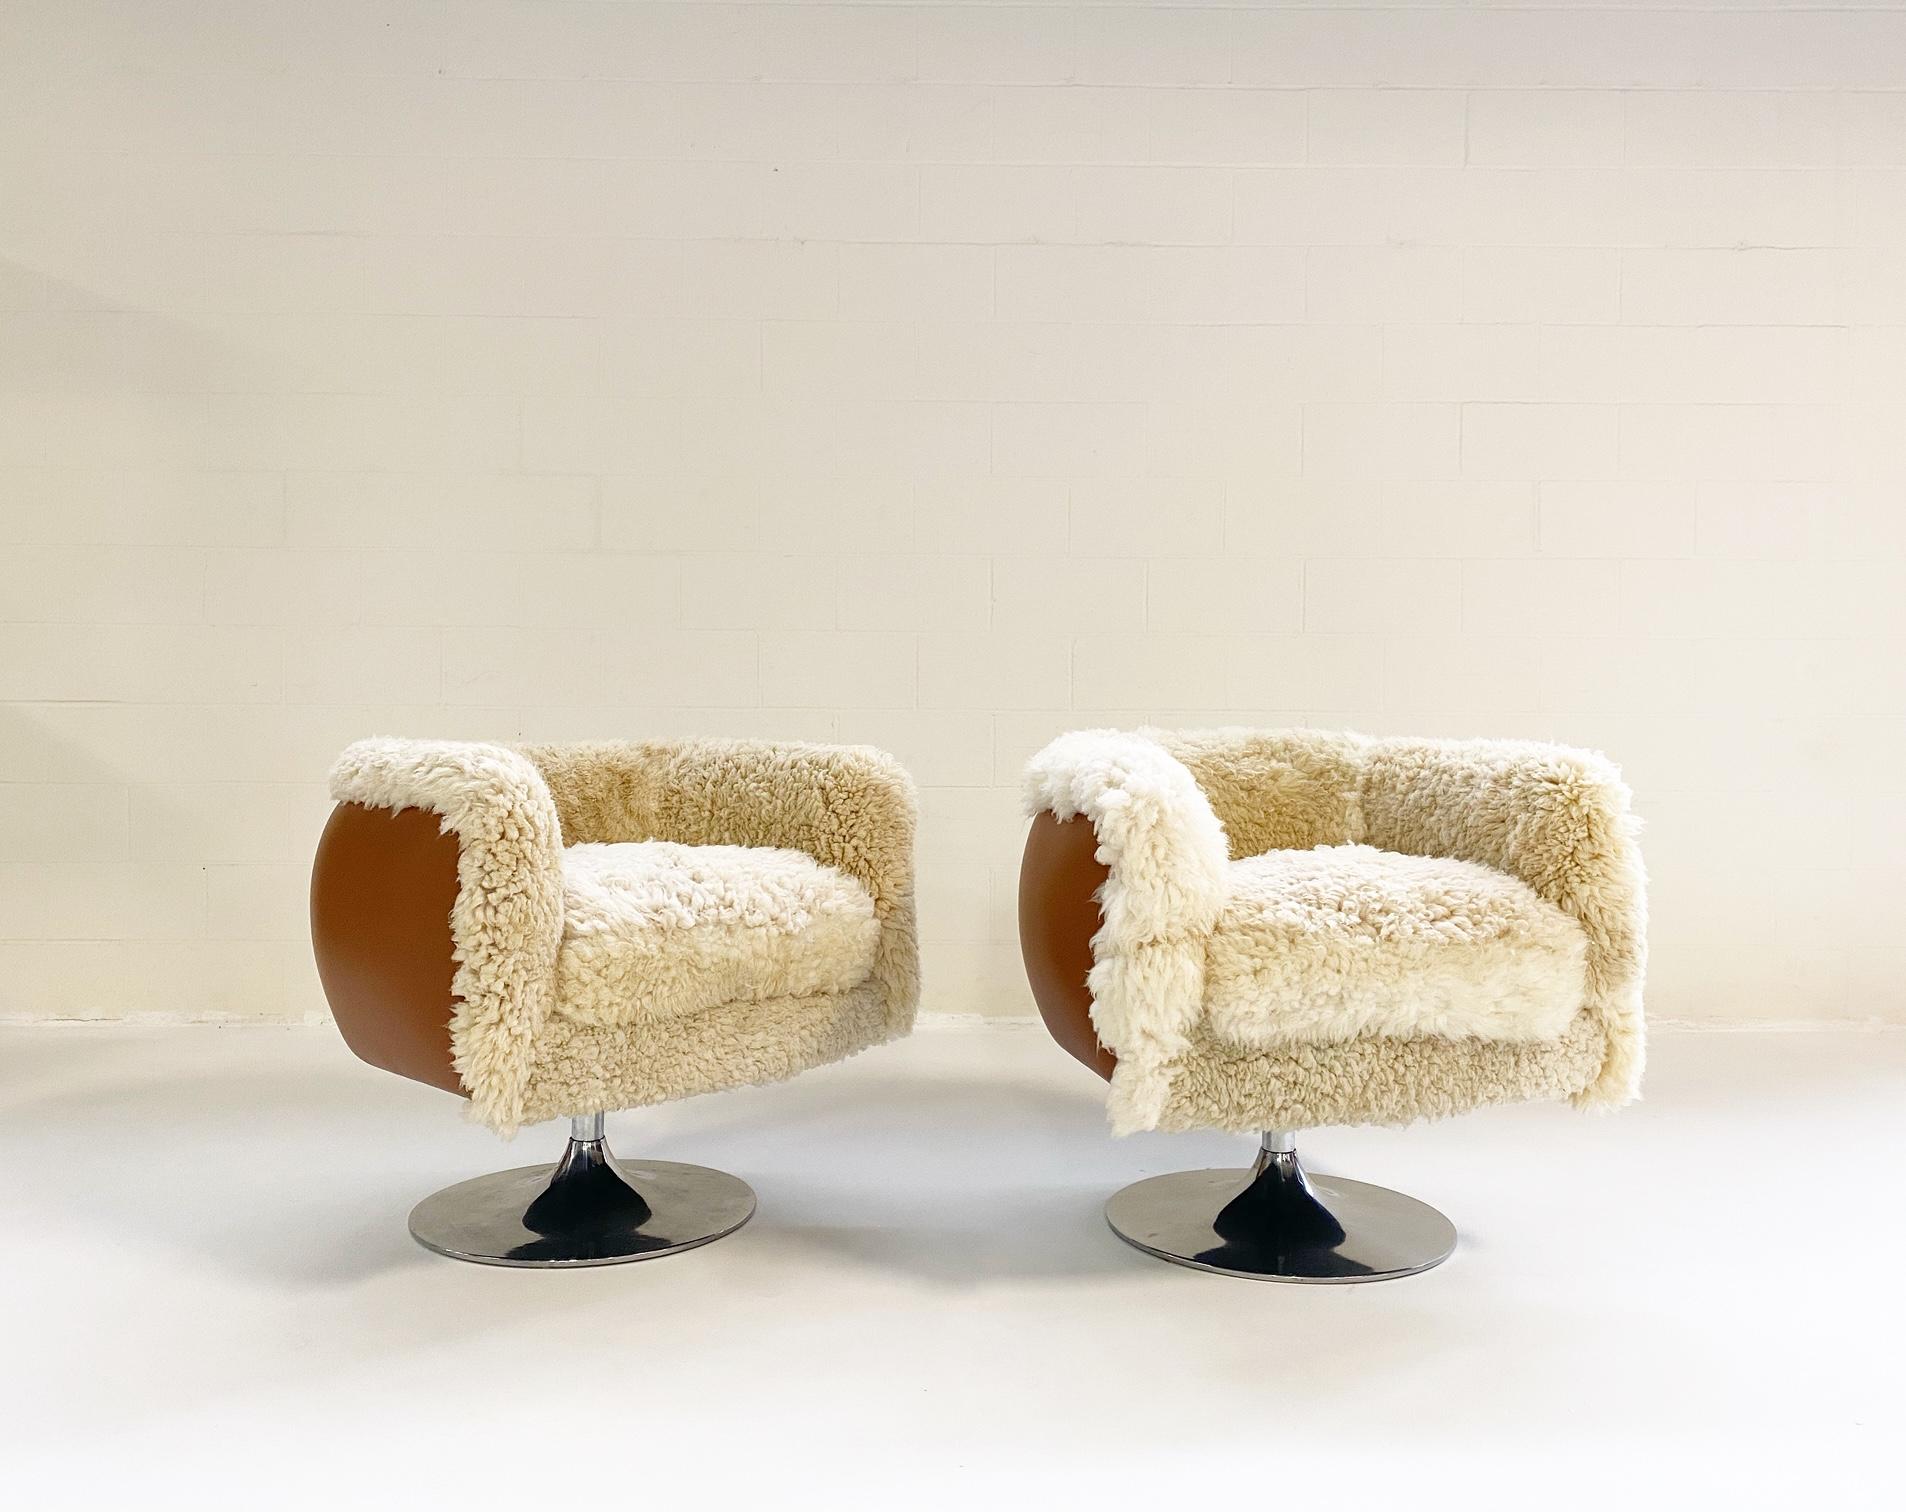 20th Century Vintage Knoll Swivel Chairs in California Sheepskin and Loro Piana Leather